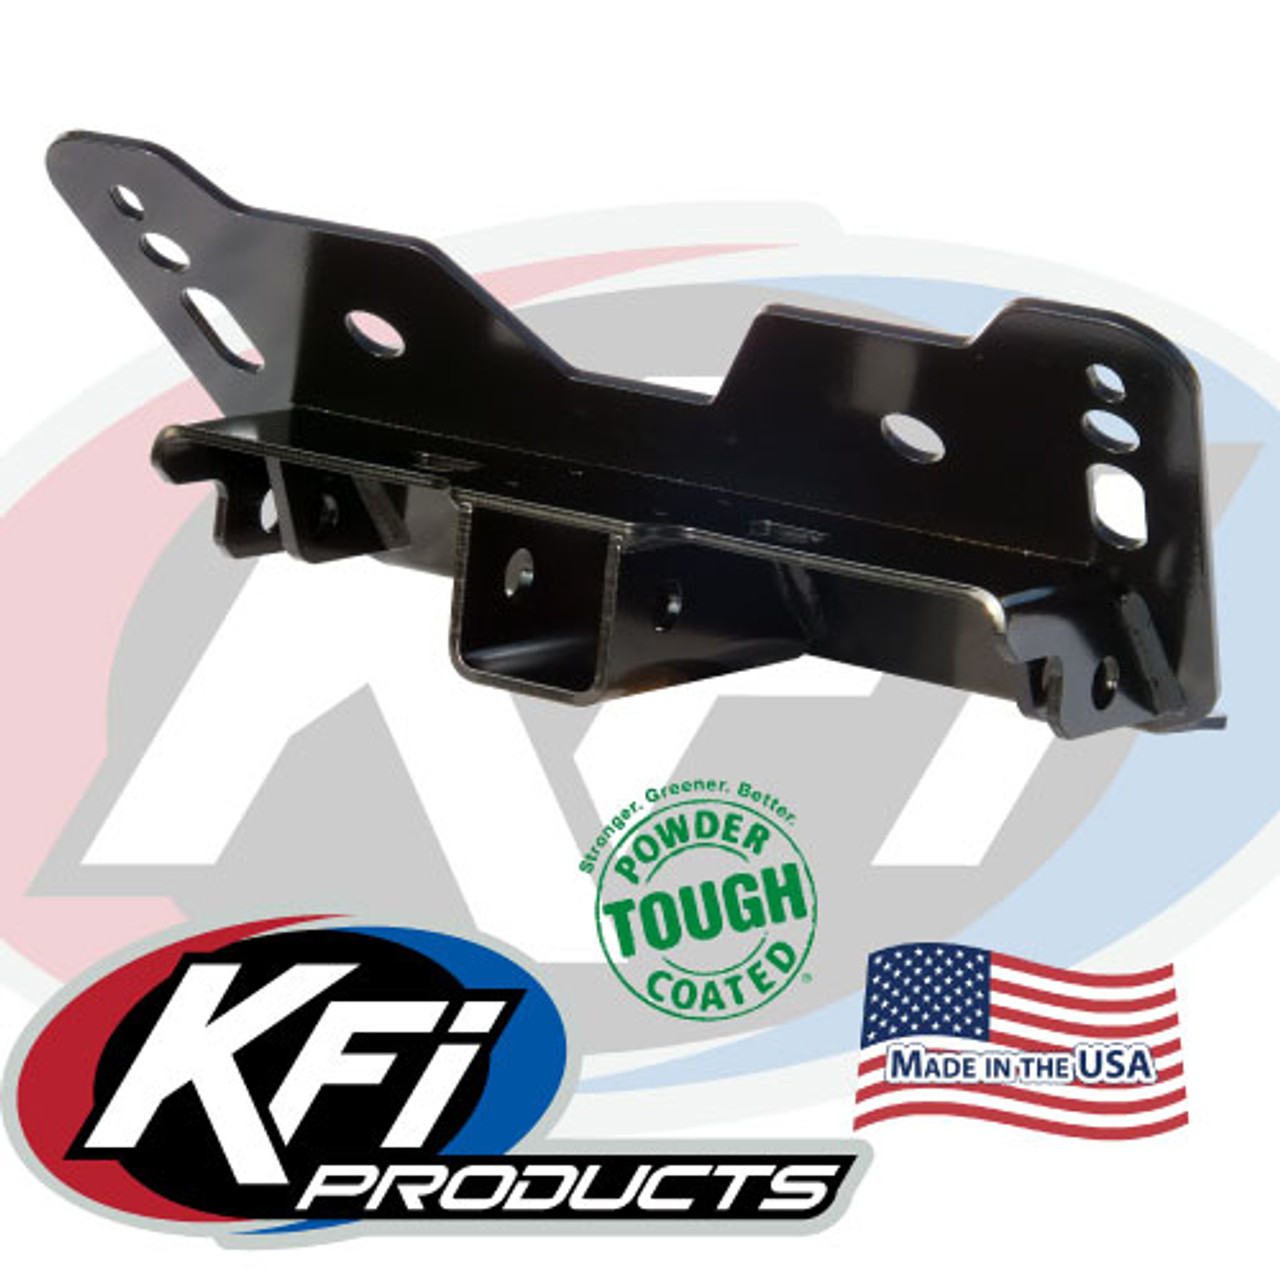 KFI Pro-Poly Series 66" Plow System For Massimo